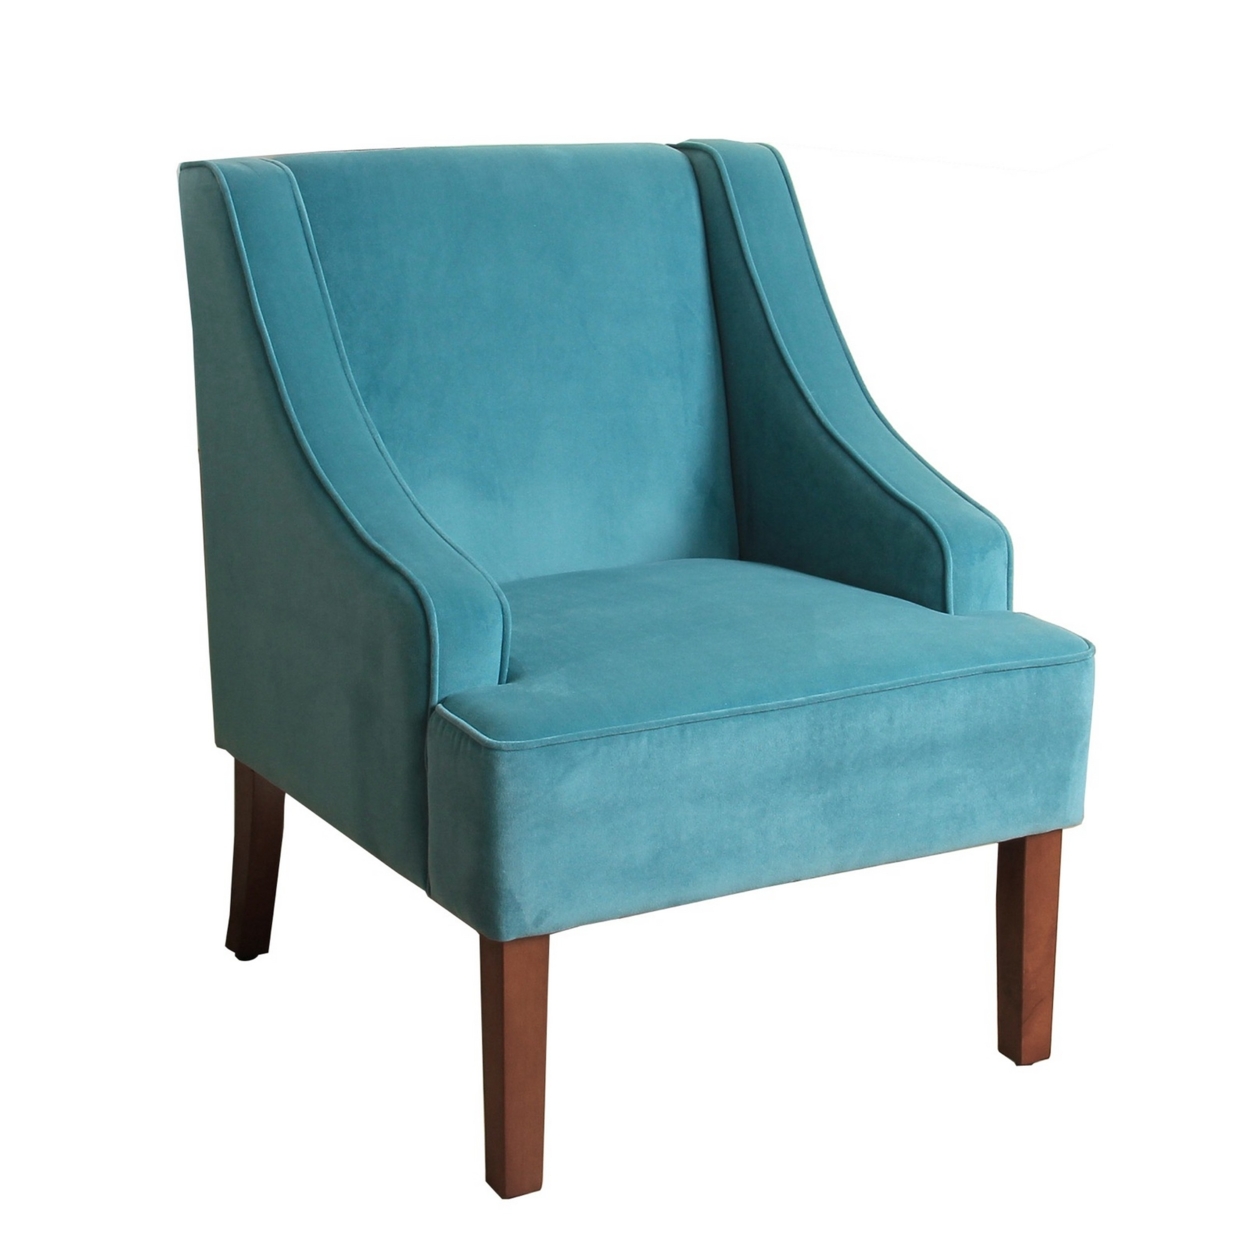 Fabric Upholstered Wooden Accent Chair With Wingback, Blue And Brown- Saltoro Sherpi